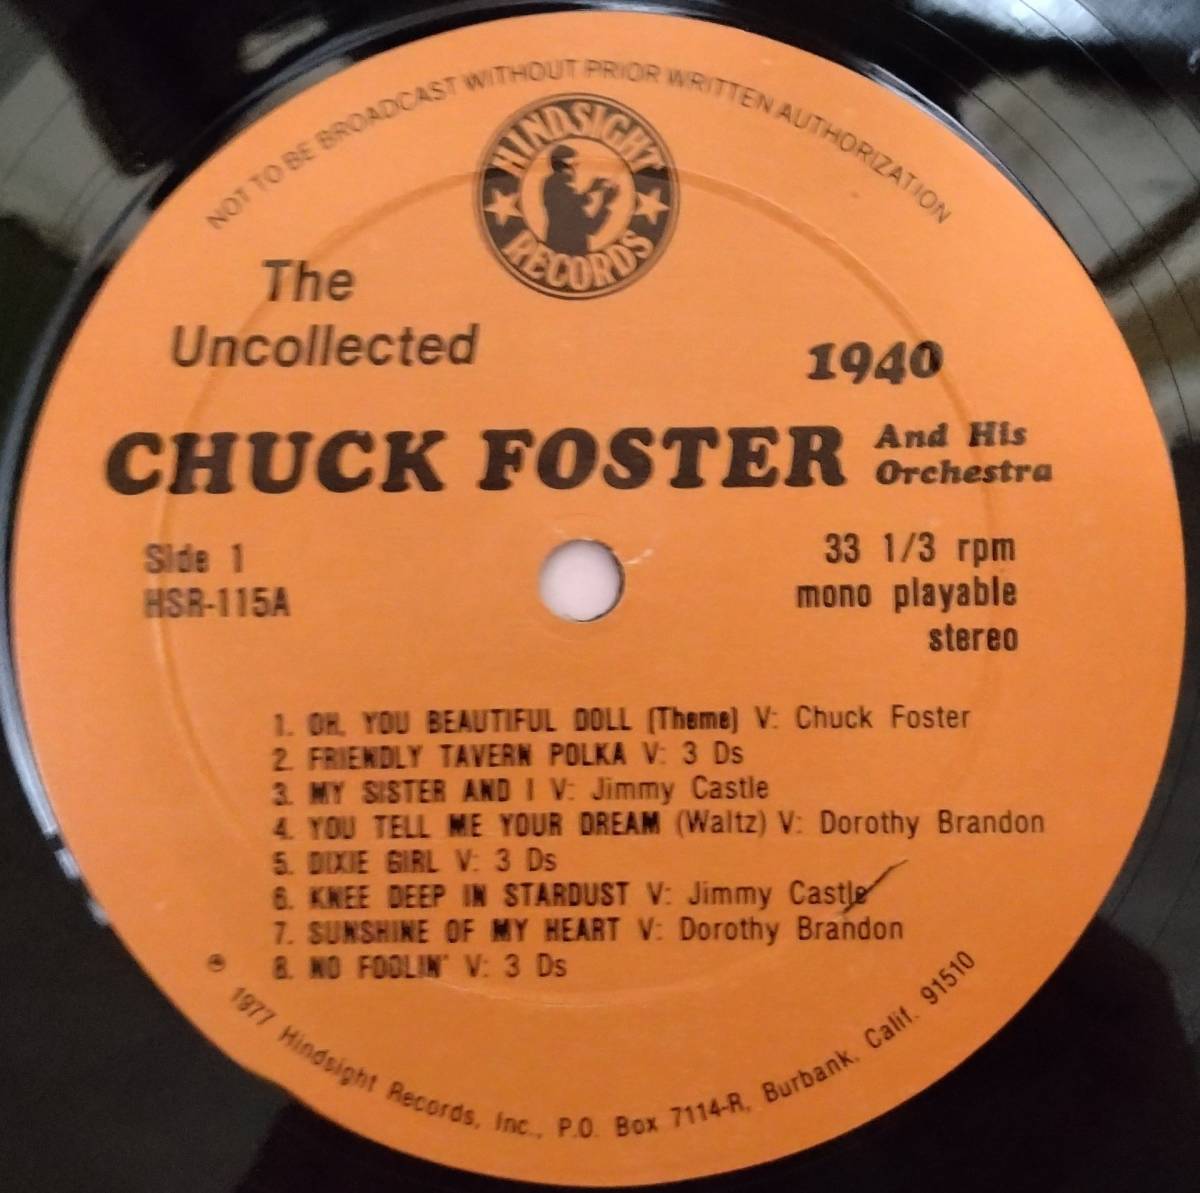 ☆LP Chuck Foster and His Orchestra / 1940 US盤 HSR-115 ☆_画像3